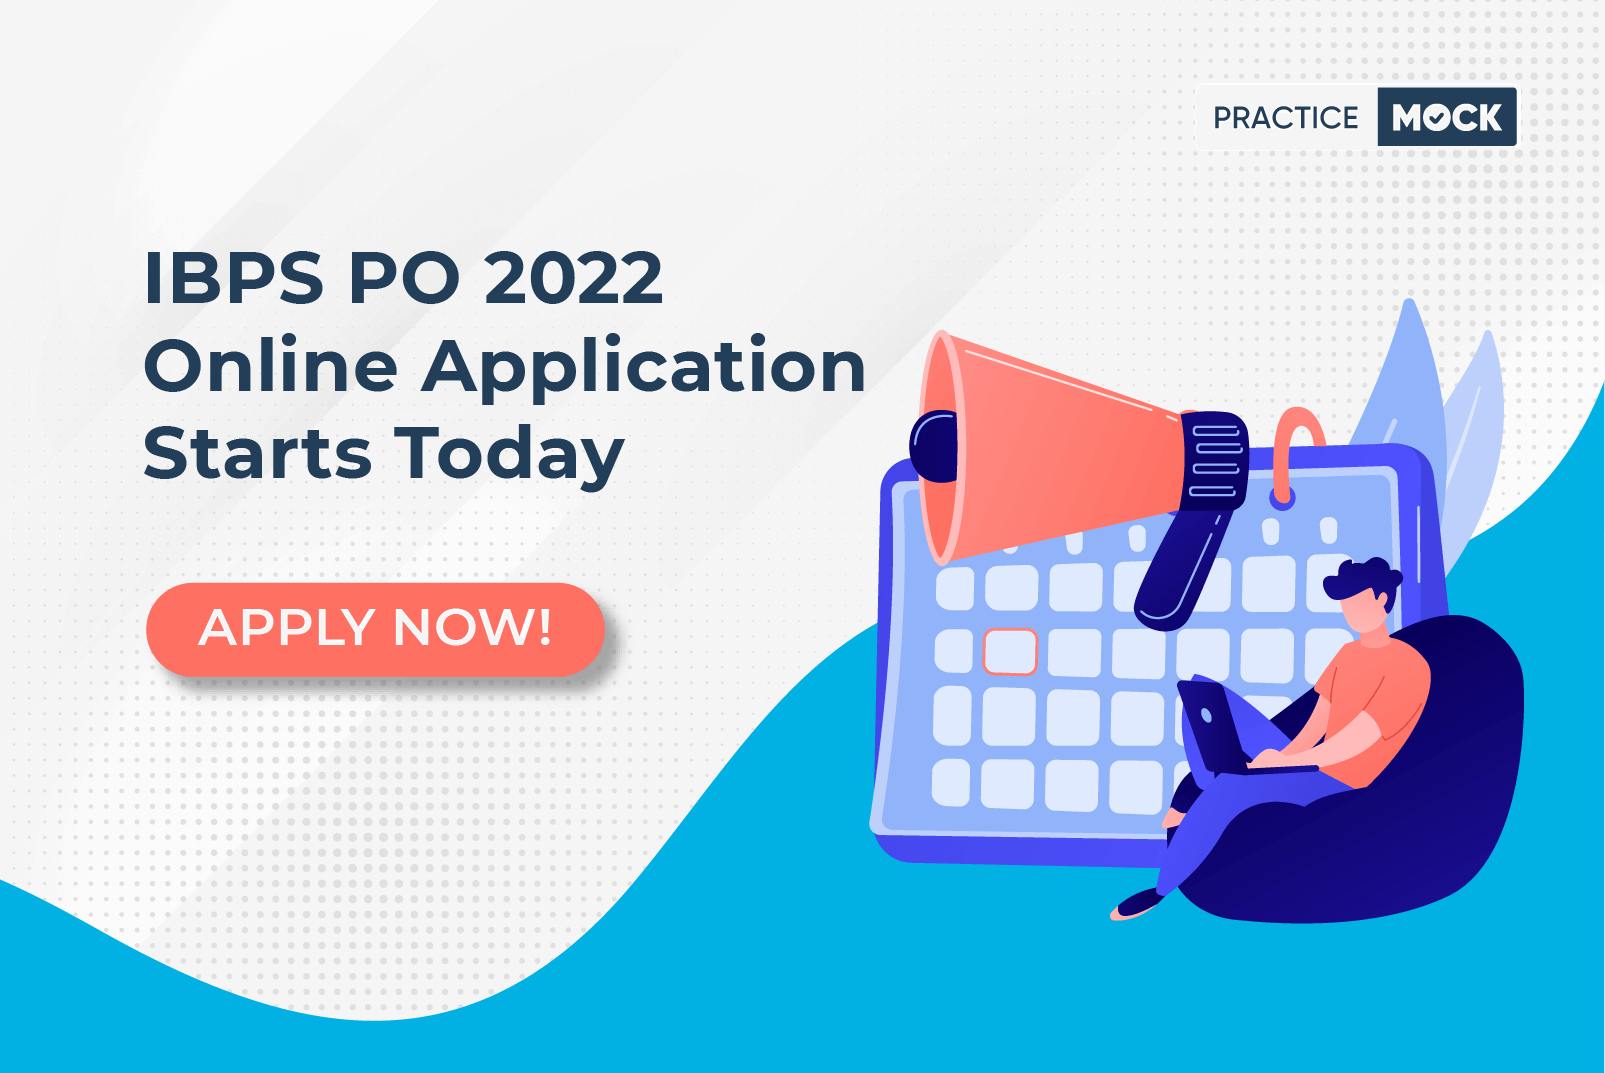 IBPS PO 2022 Online Application Starts Today - Apply Now!